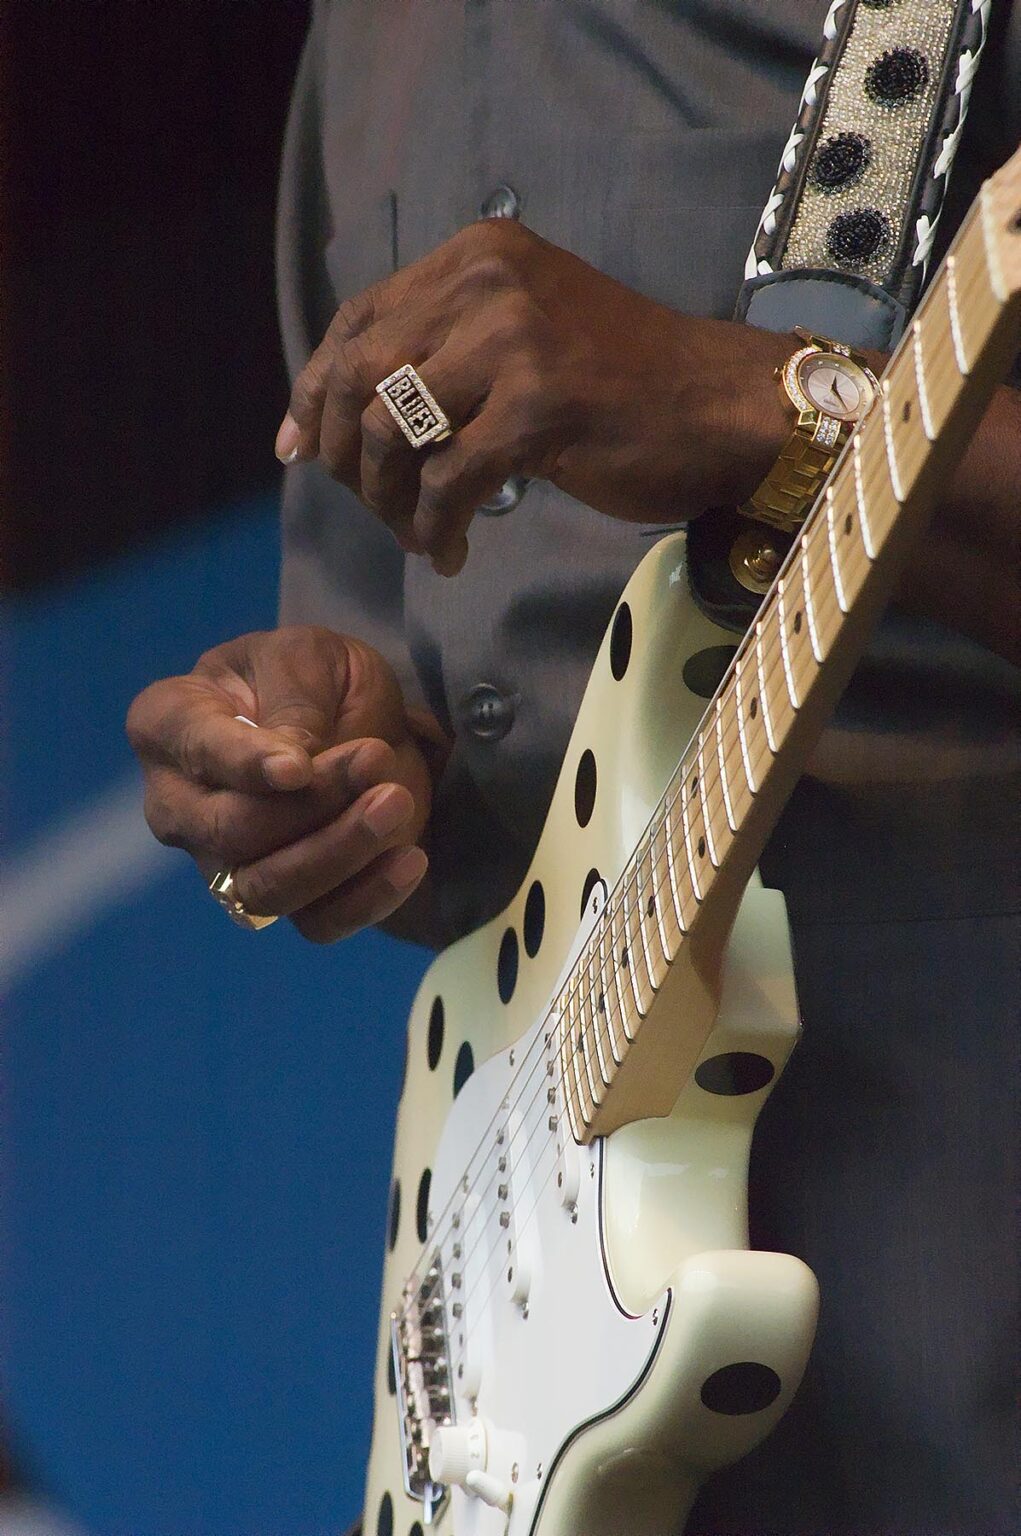 The hands of Buddy Guy, his blues ring and guitar and sings at the MONTEREY JAZZ FESTIVAL - CALIFORNIA